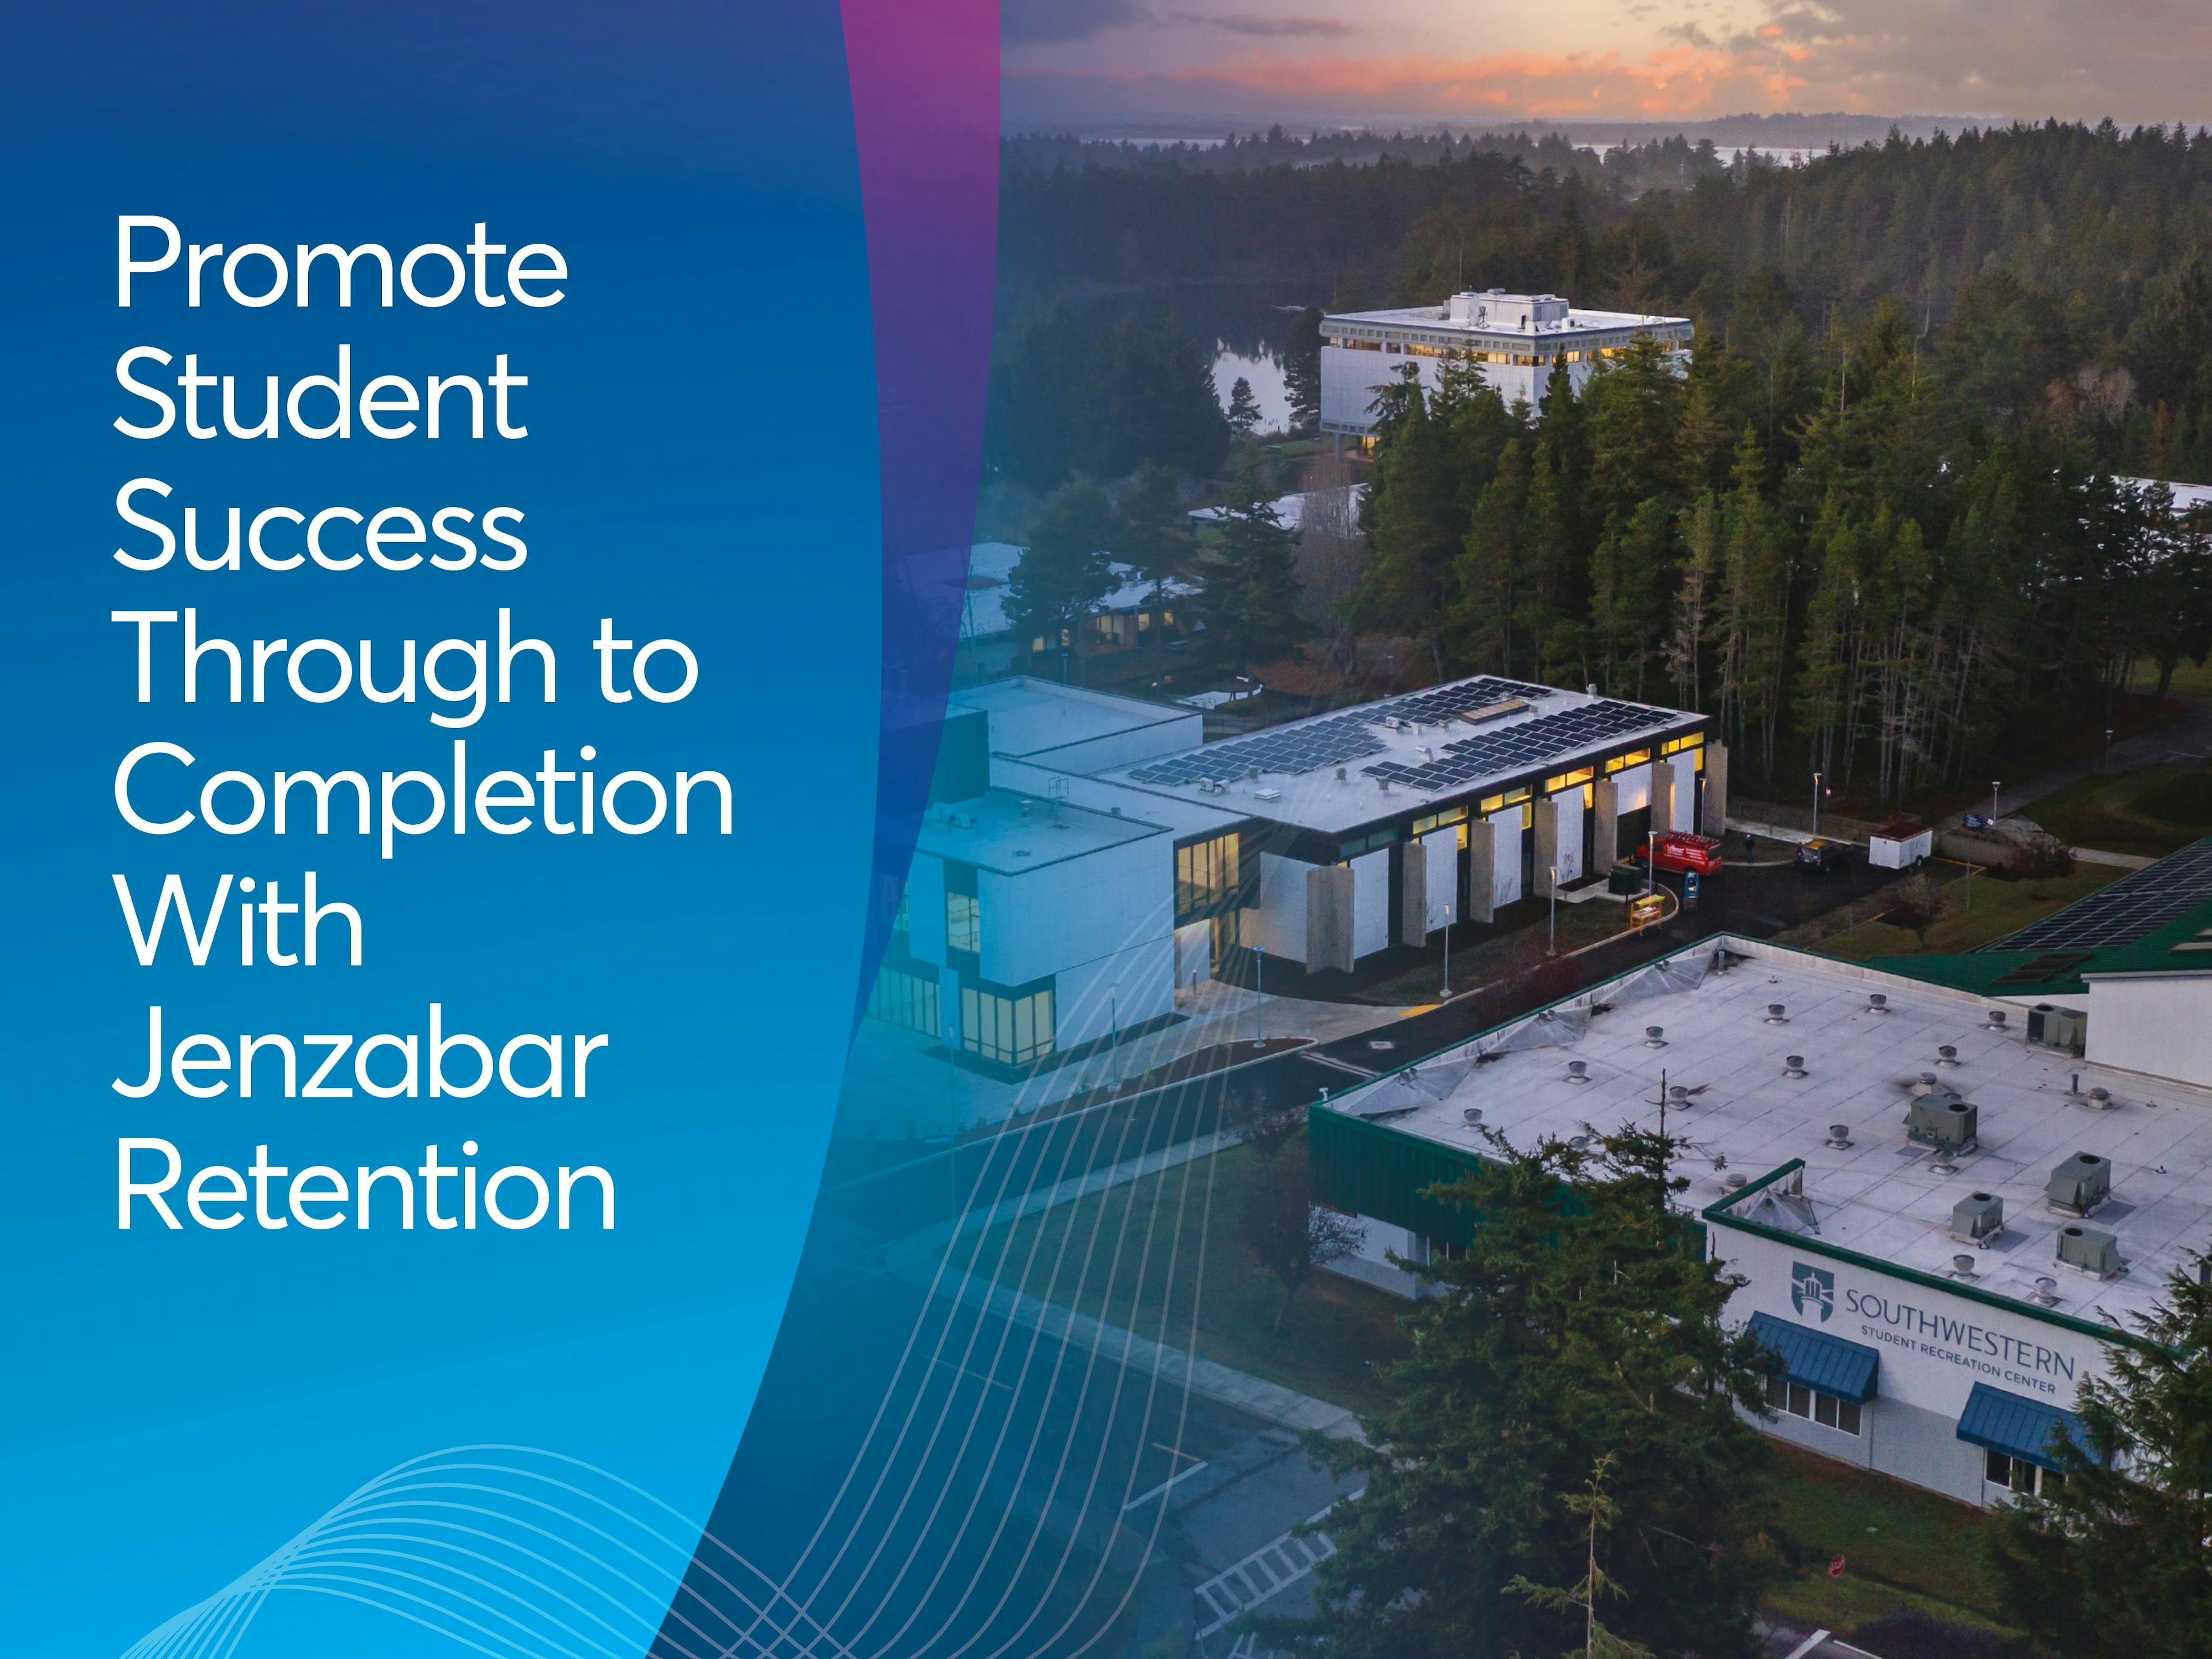 Promote Student Success Through to Completion With Jenzabar Retention